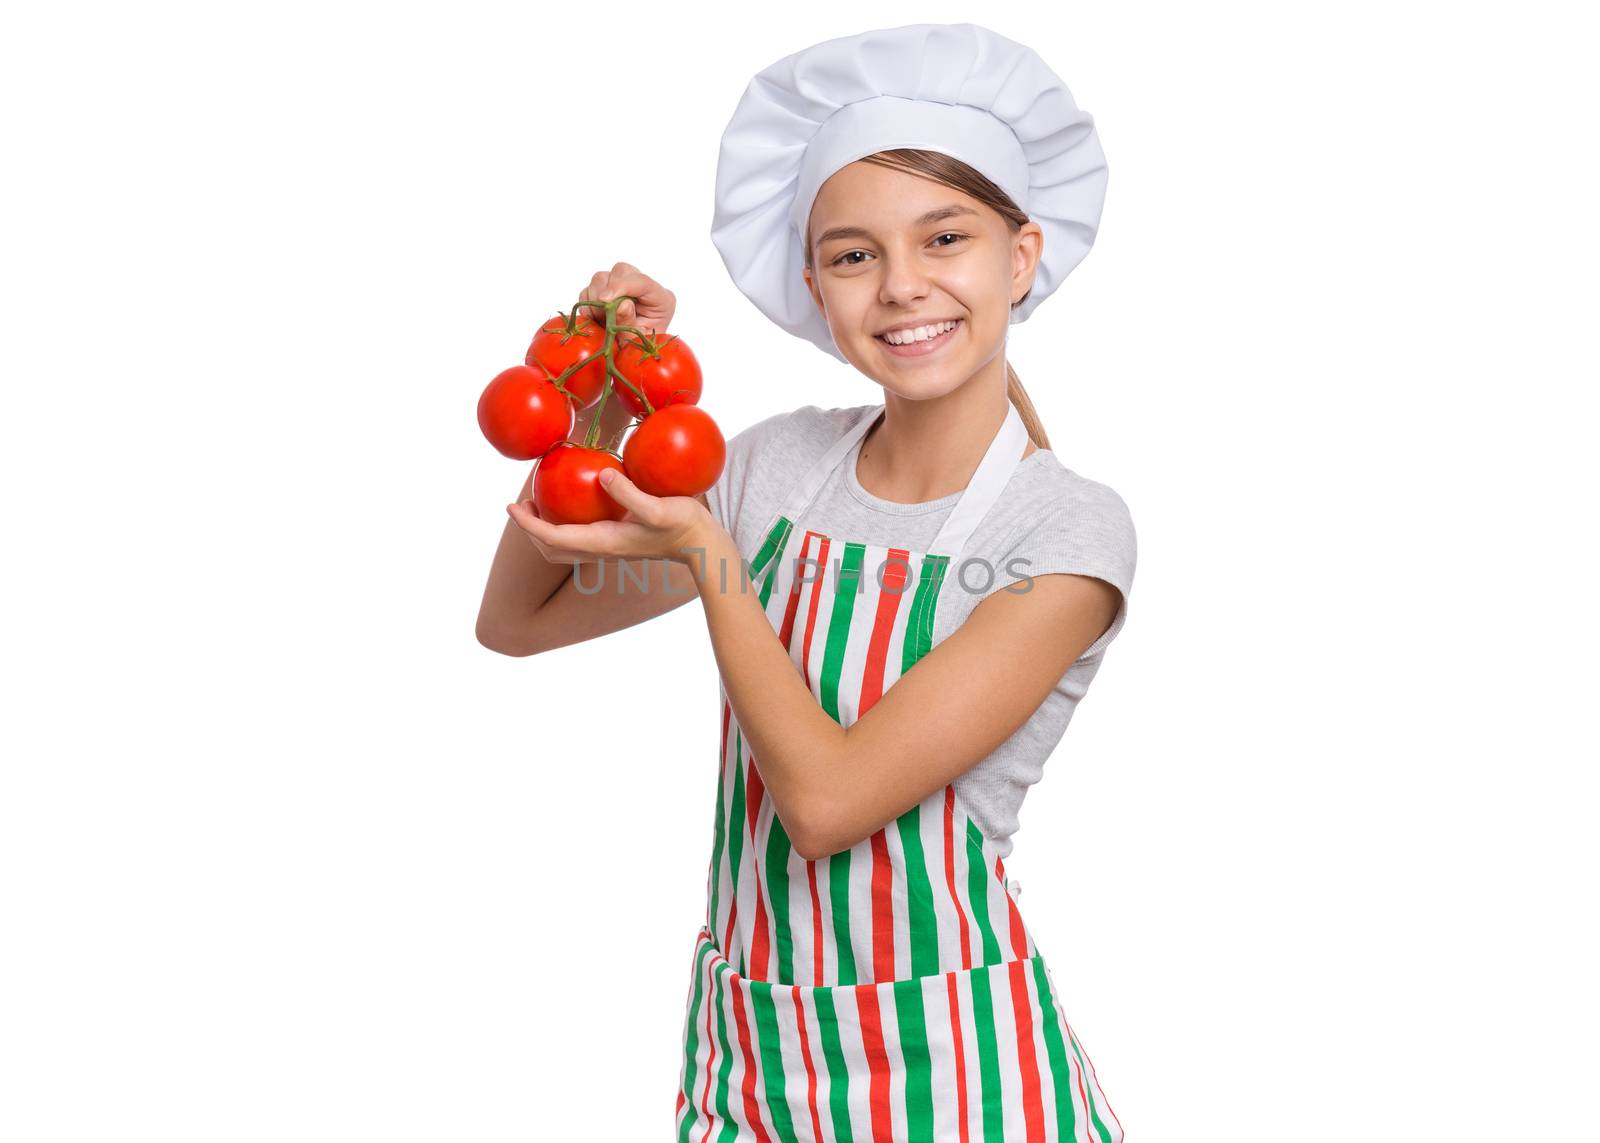 Girl wearing a chef's hat with emotions holding groceries in hands, isolated on white background.